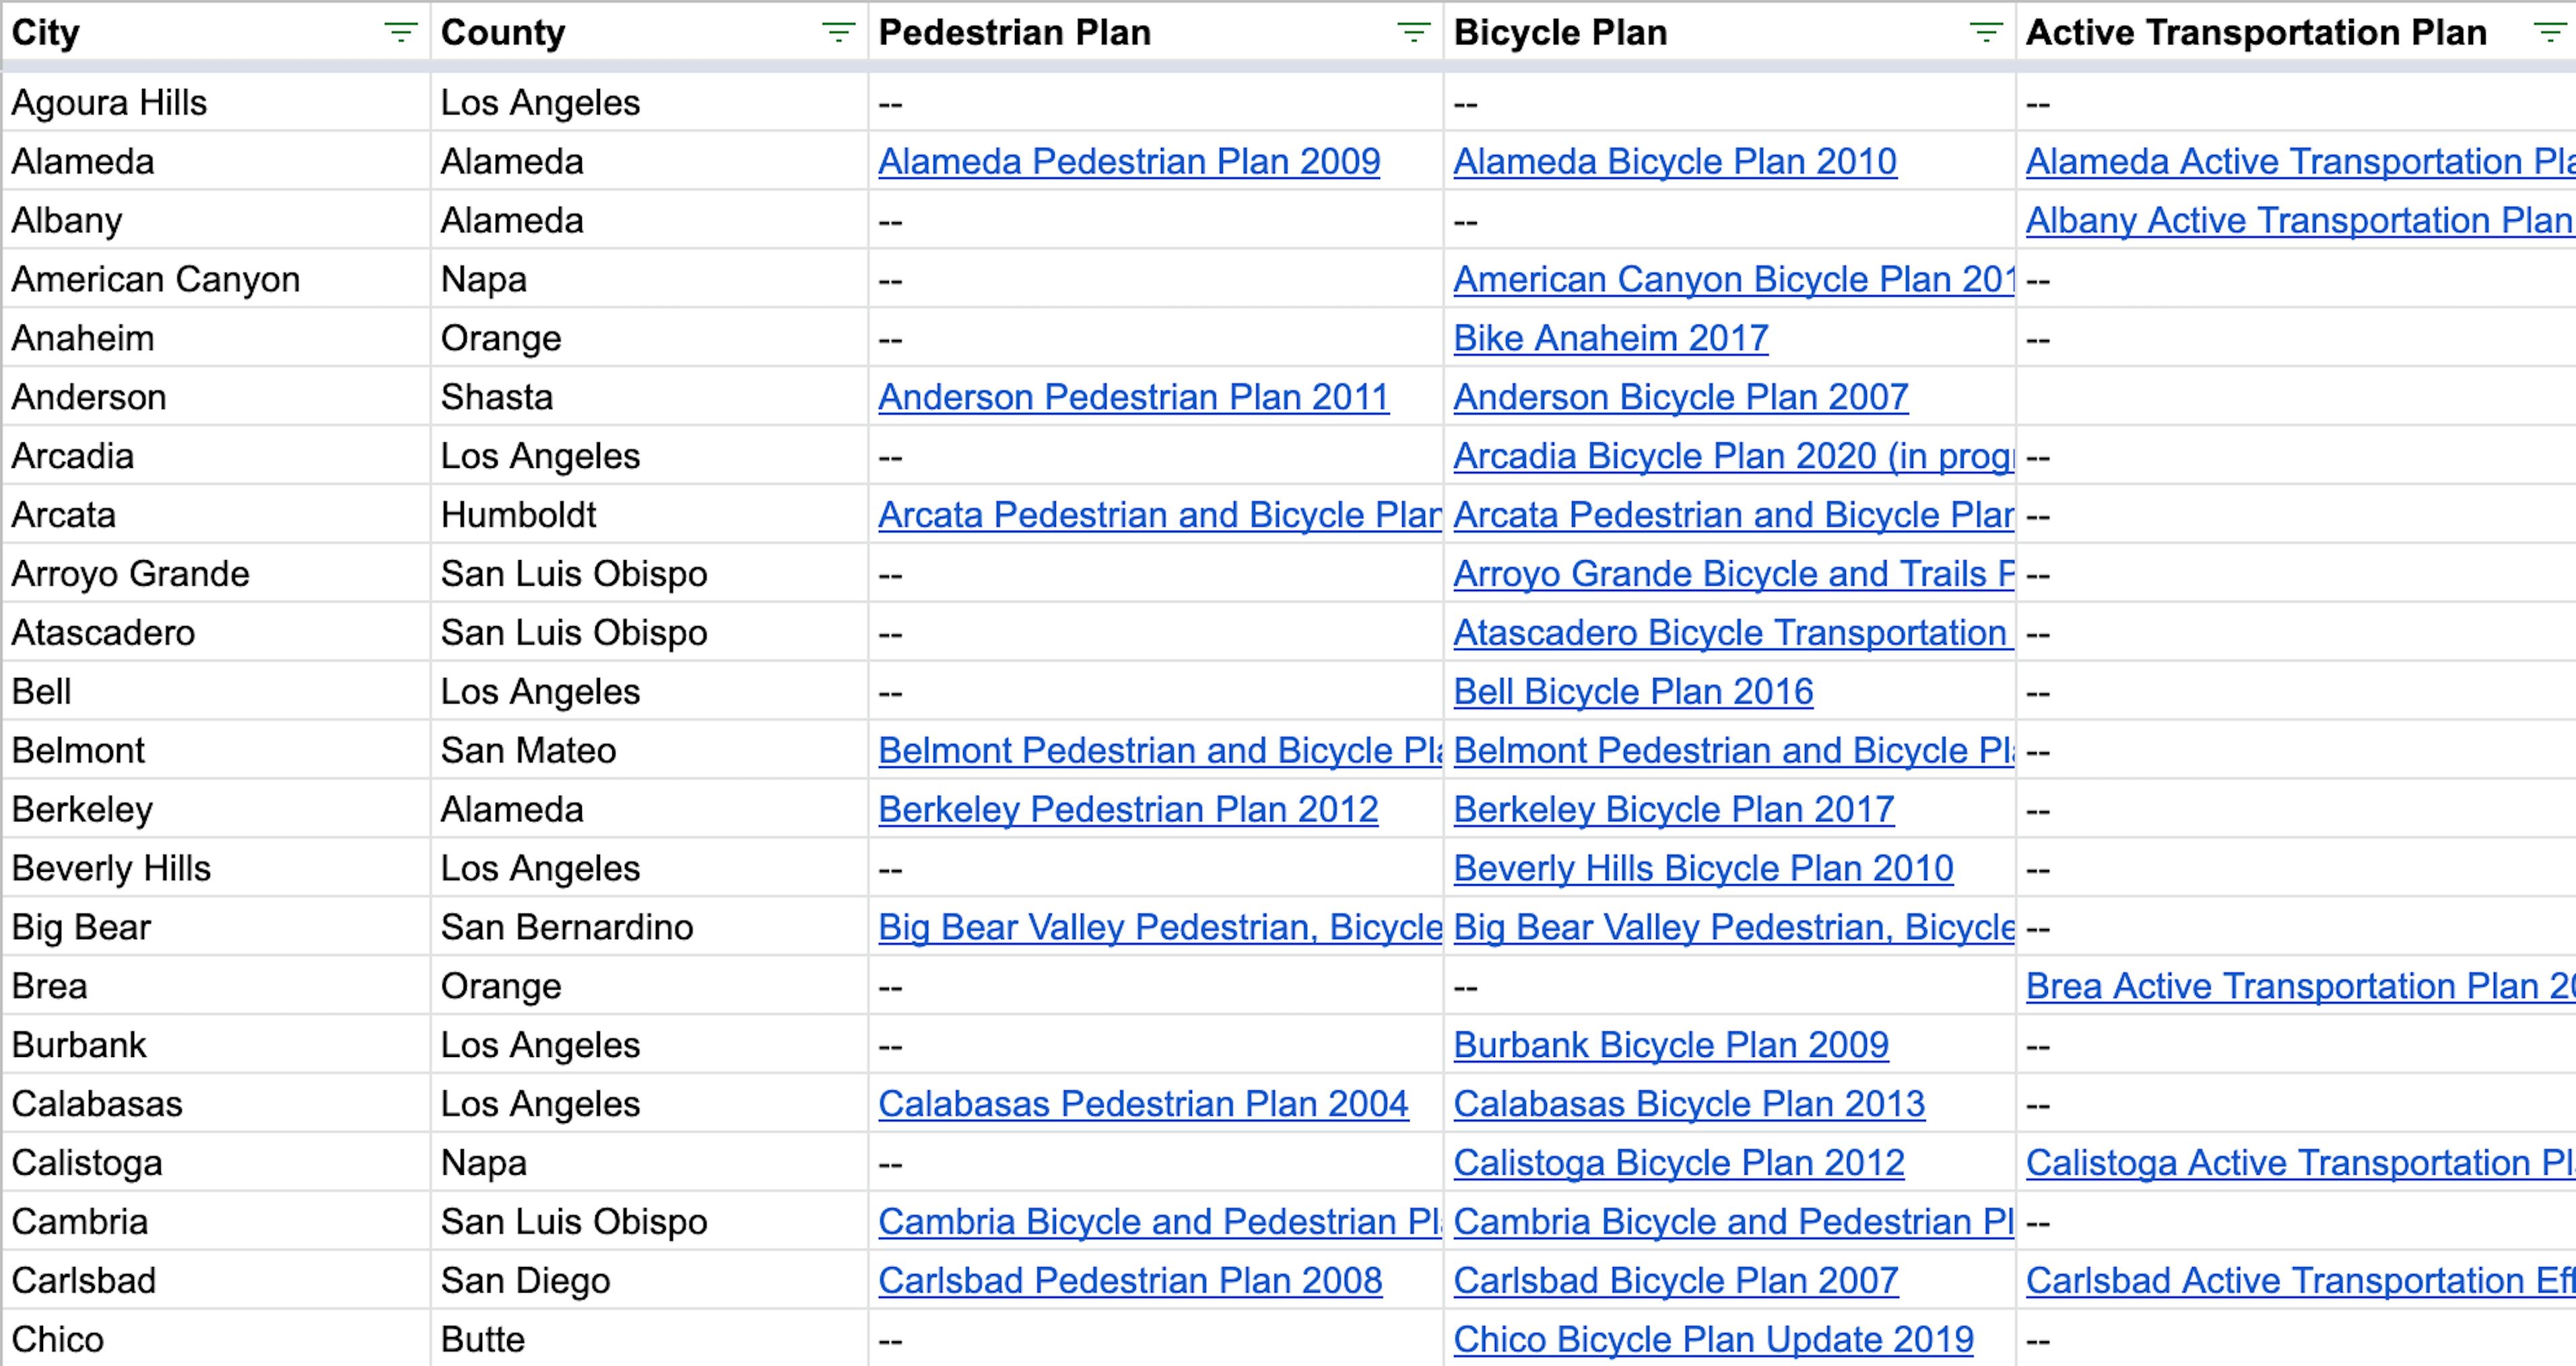 Screen capture of Master Plans by City spreadsheet.